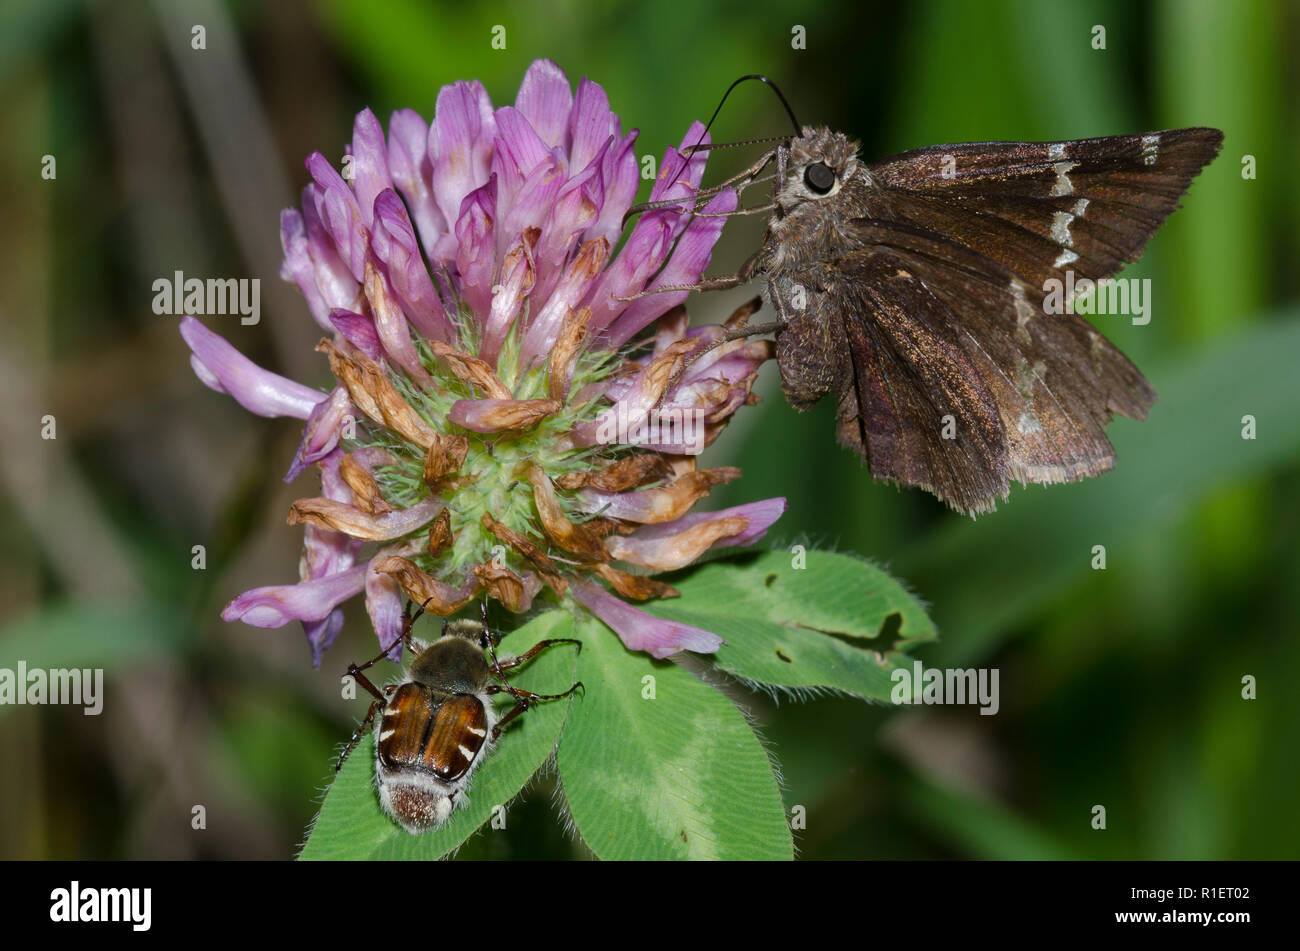 Southern Cloudywing, Cecropterus bathyllus, and flower chafer, Trichiotinus sp., on red clover, Trifolium pratense Stock Photo